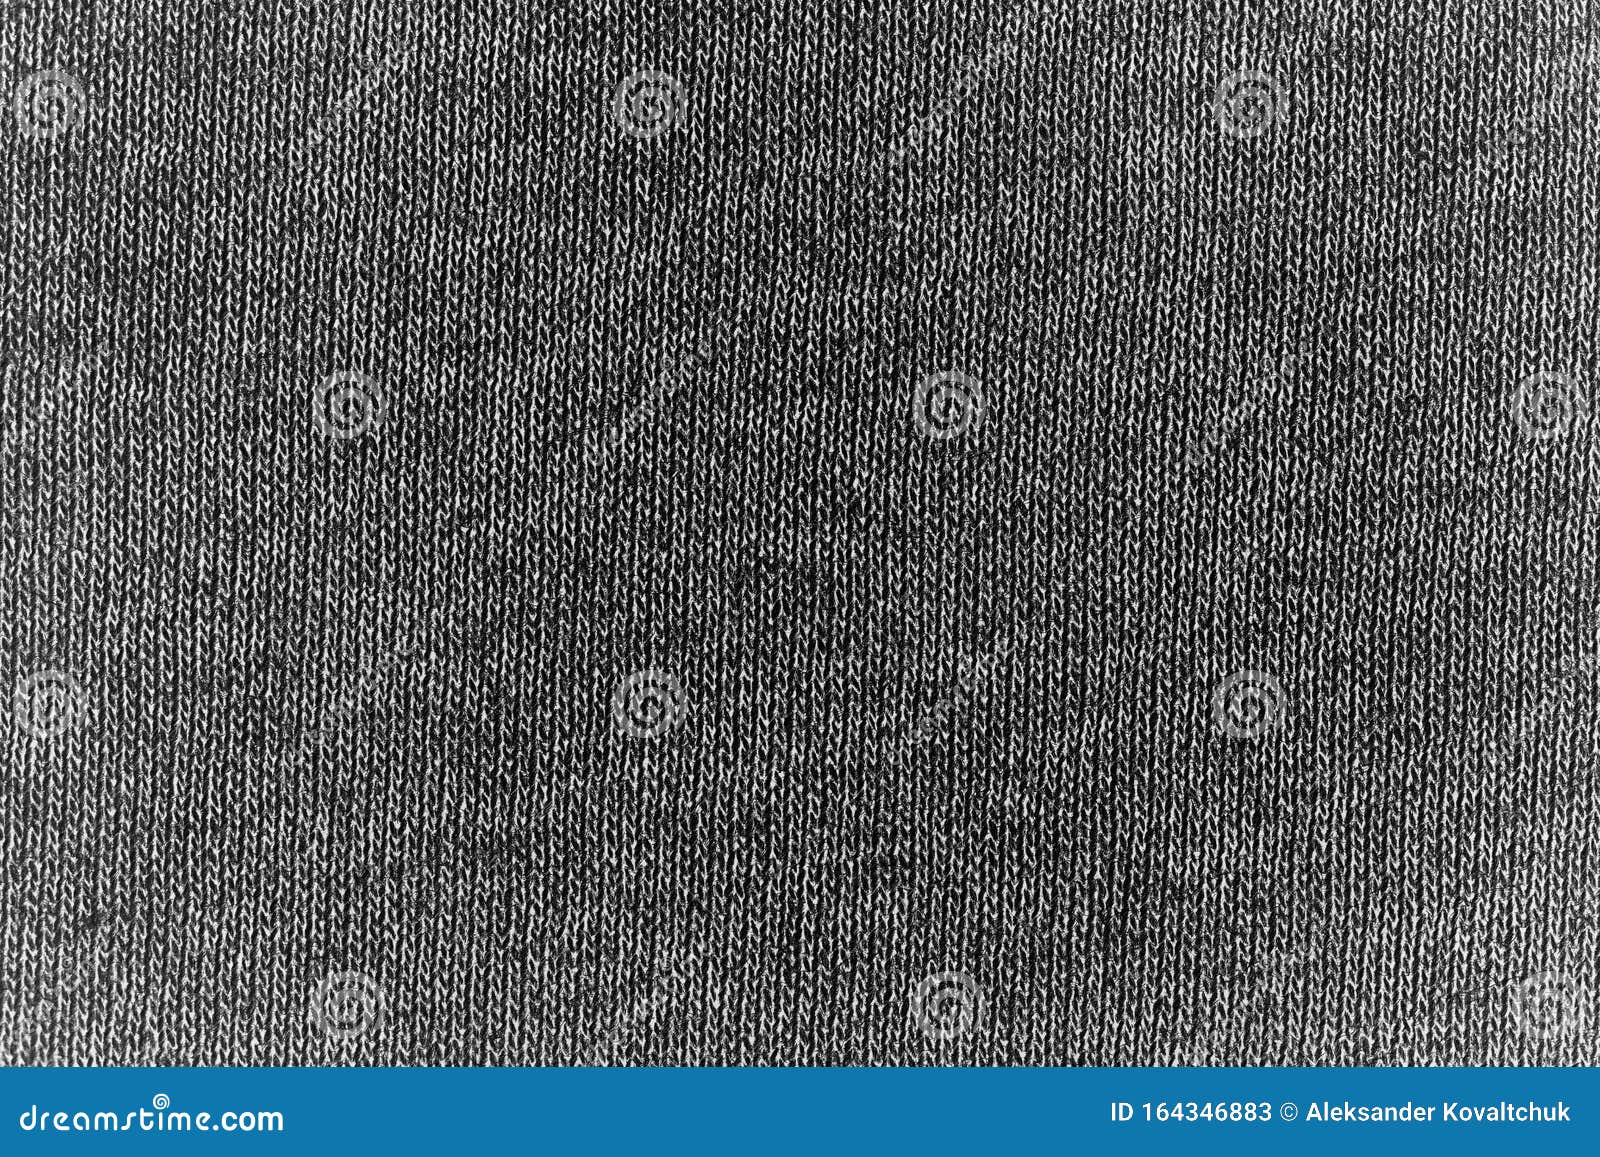 Black Jersey Fabric Texture Background Stock Image - Image of knit ...